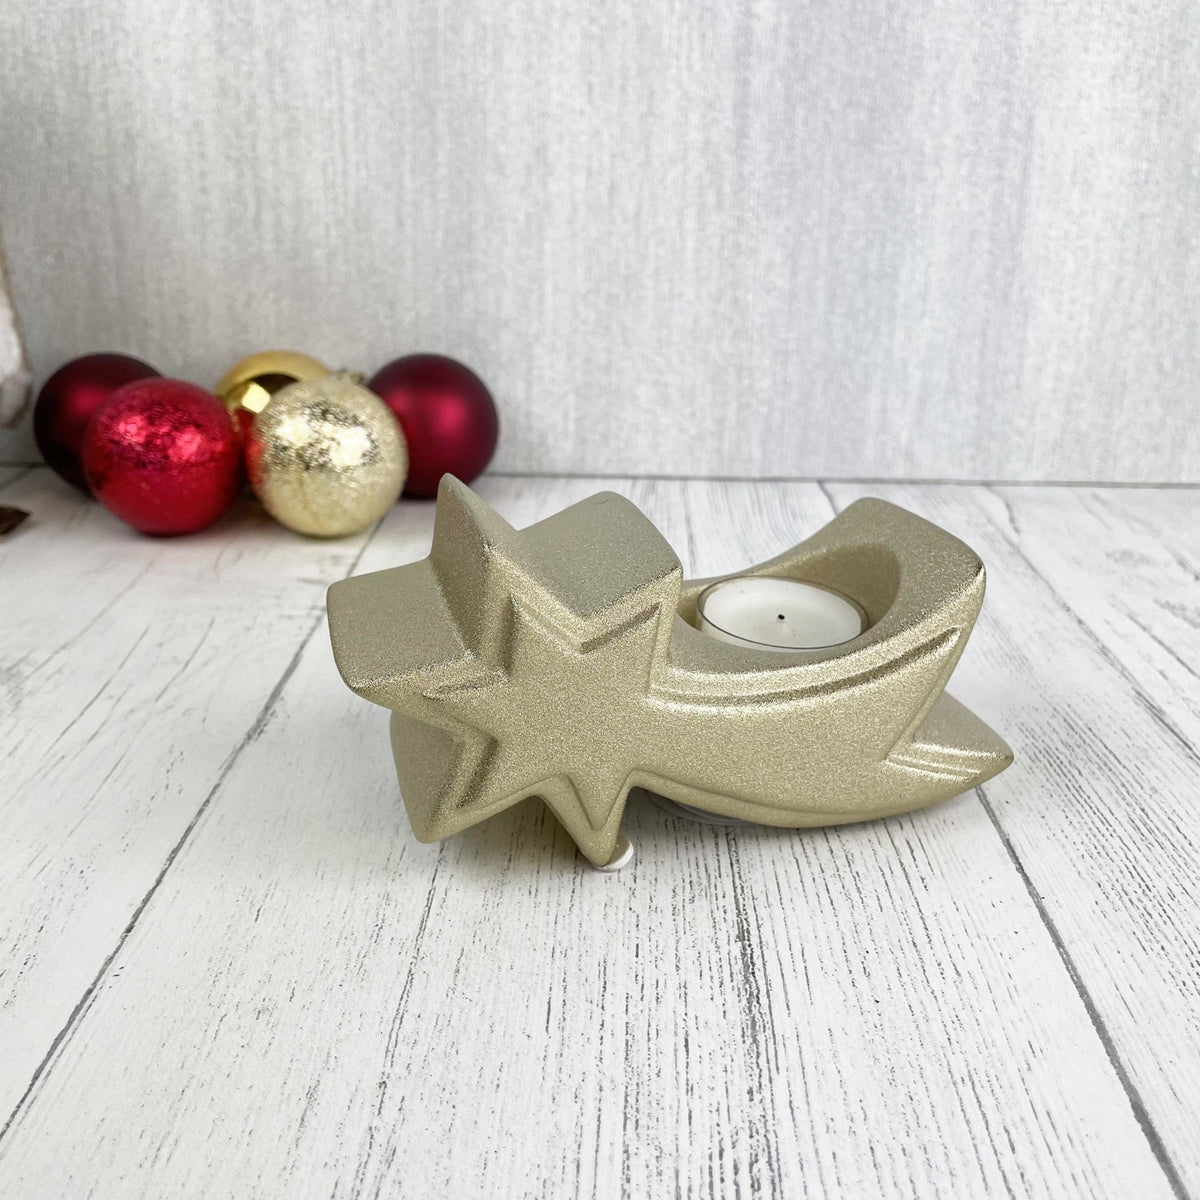 Gold star tea light candle holder with lit candle